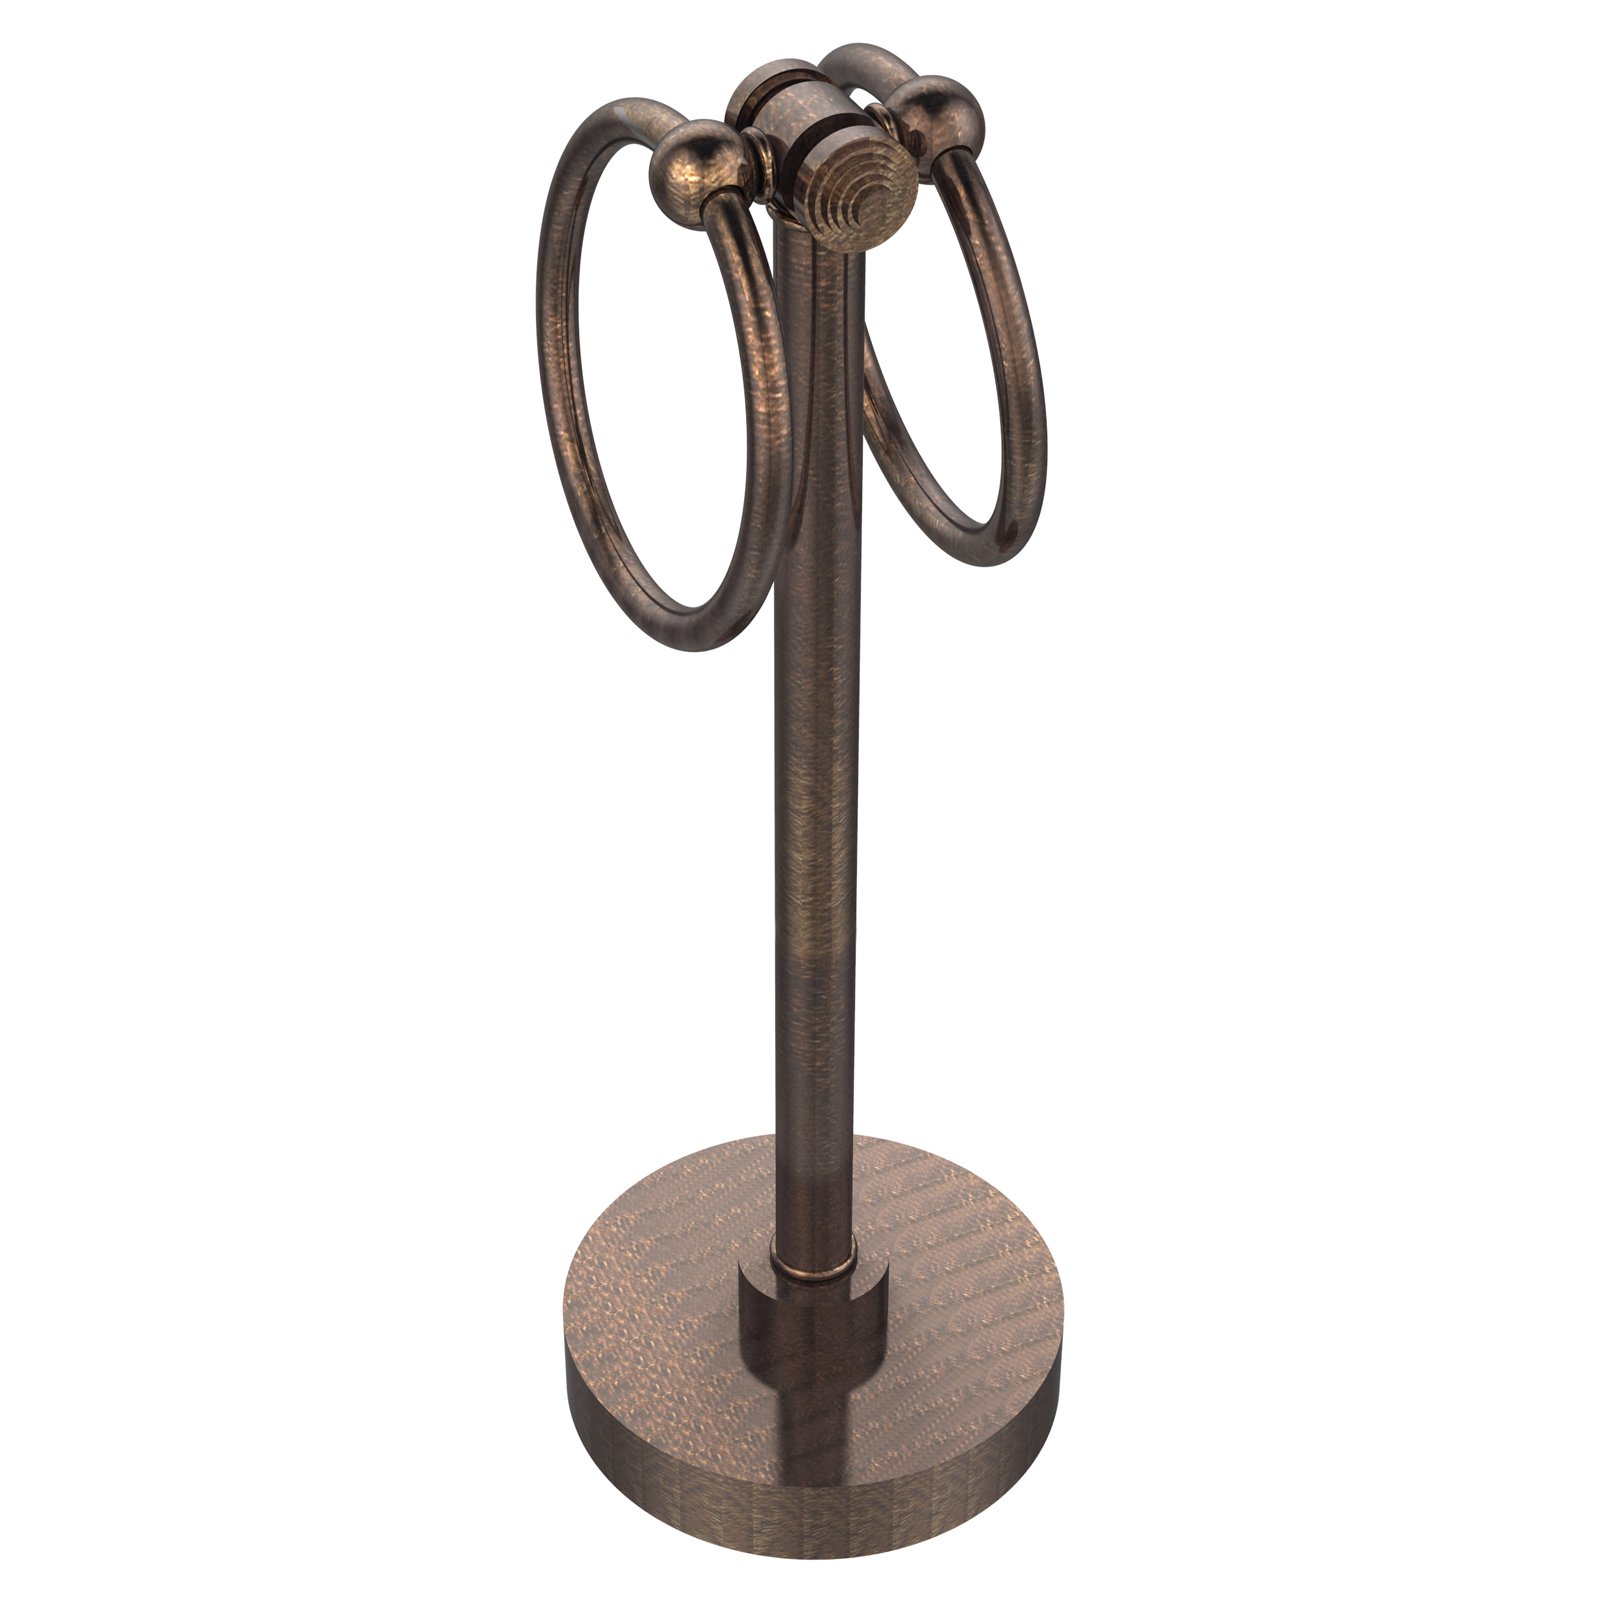 Southbeach Vanity Top 2 Towel Ring Guest Towel Holder in Oil Rubbed Bronze - image 2 of 2